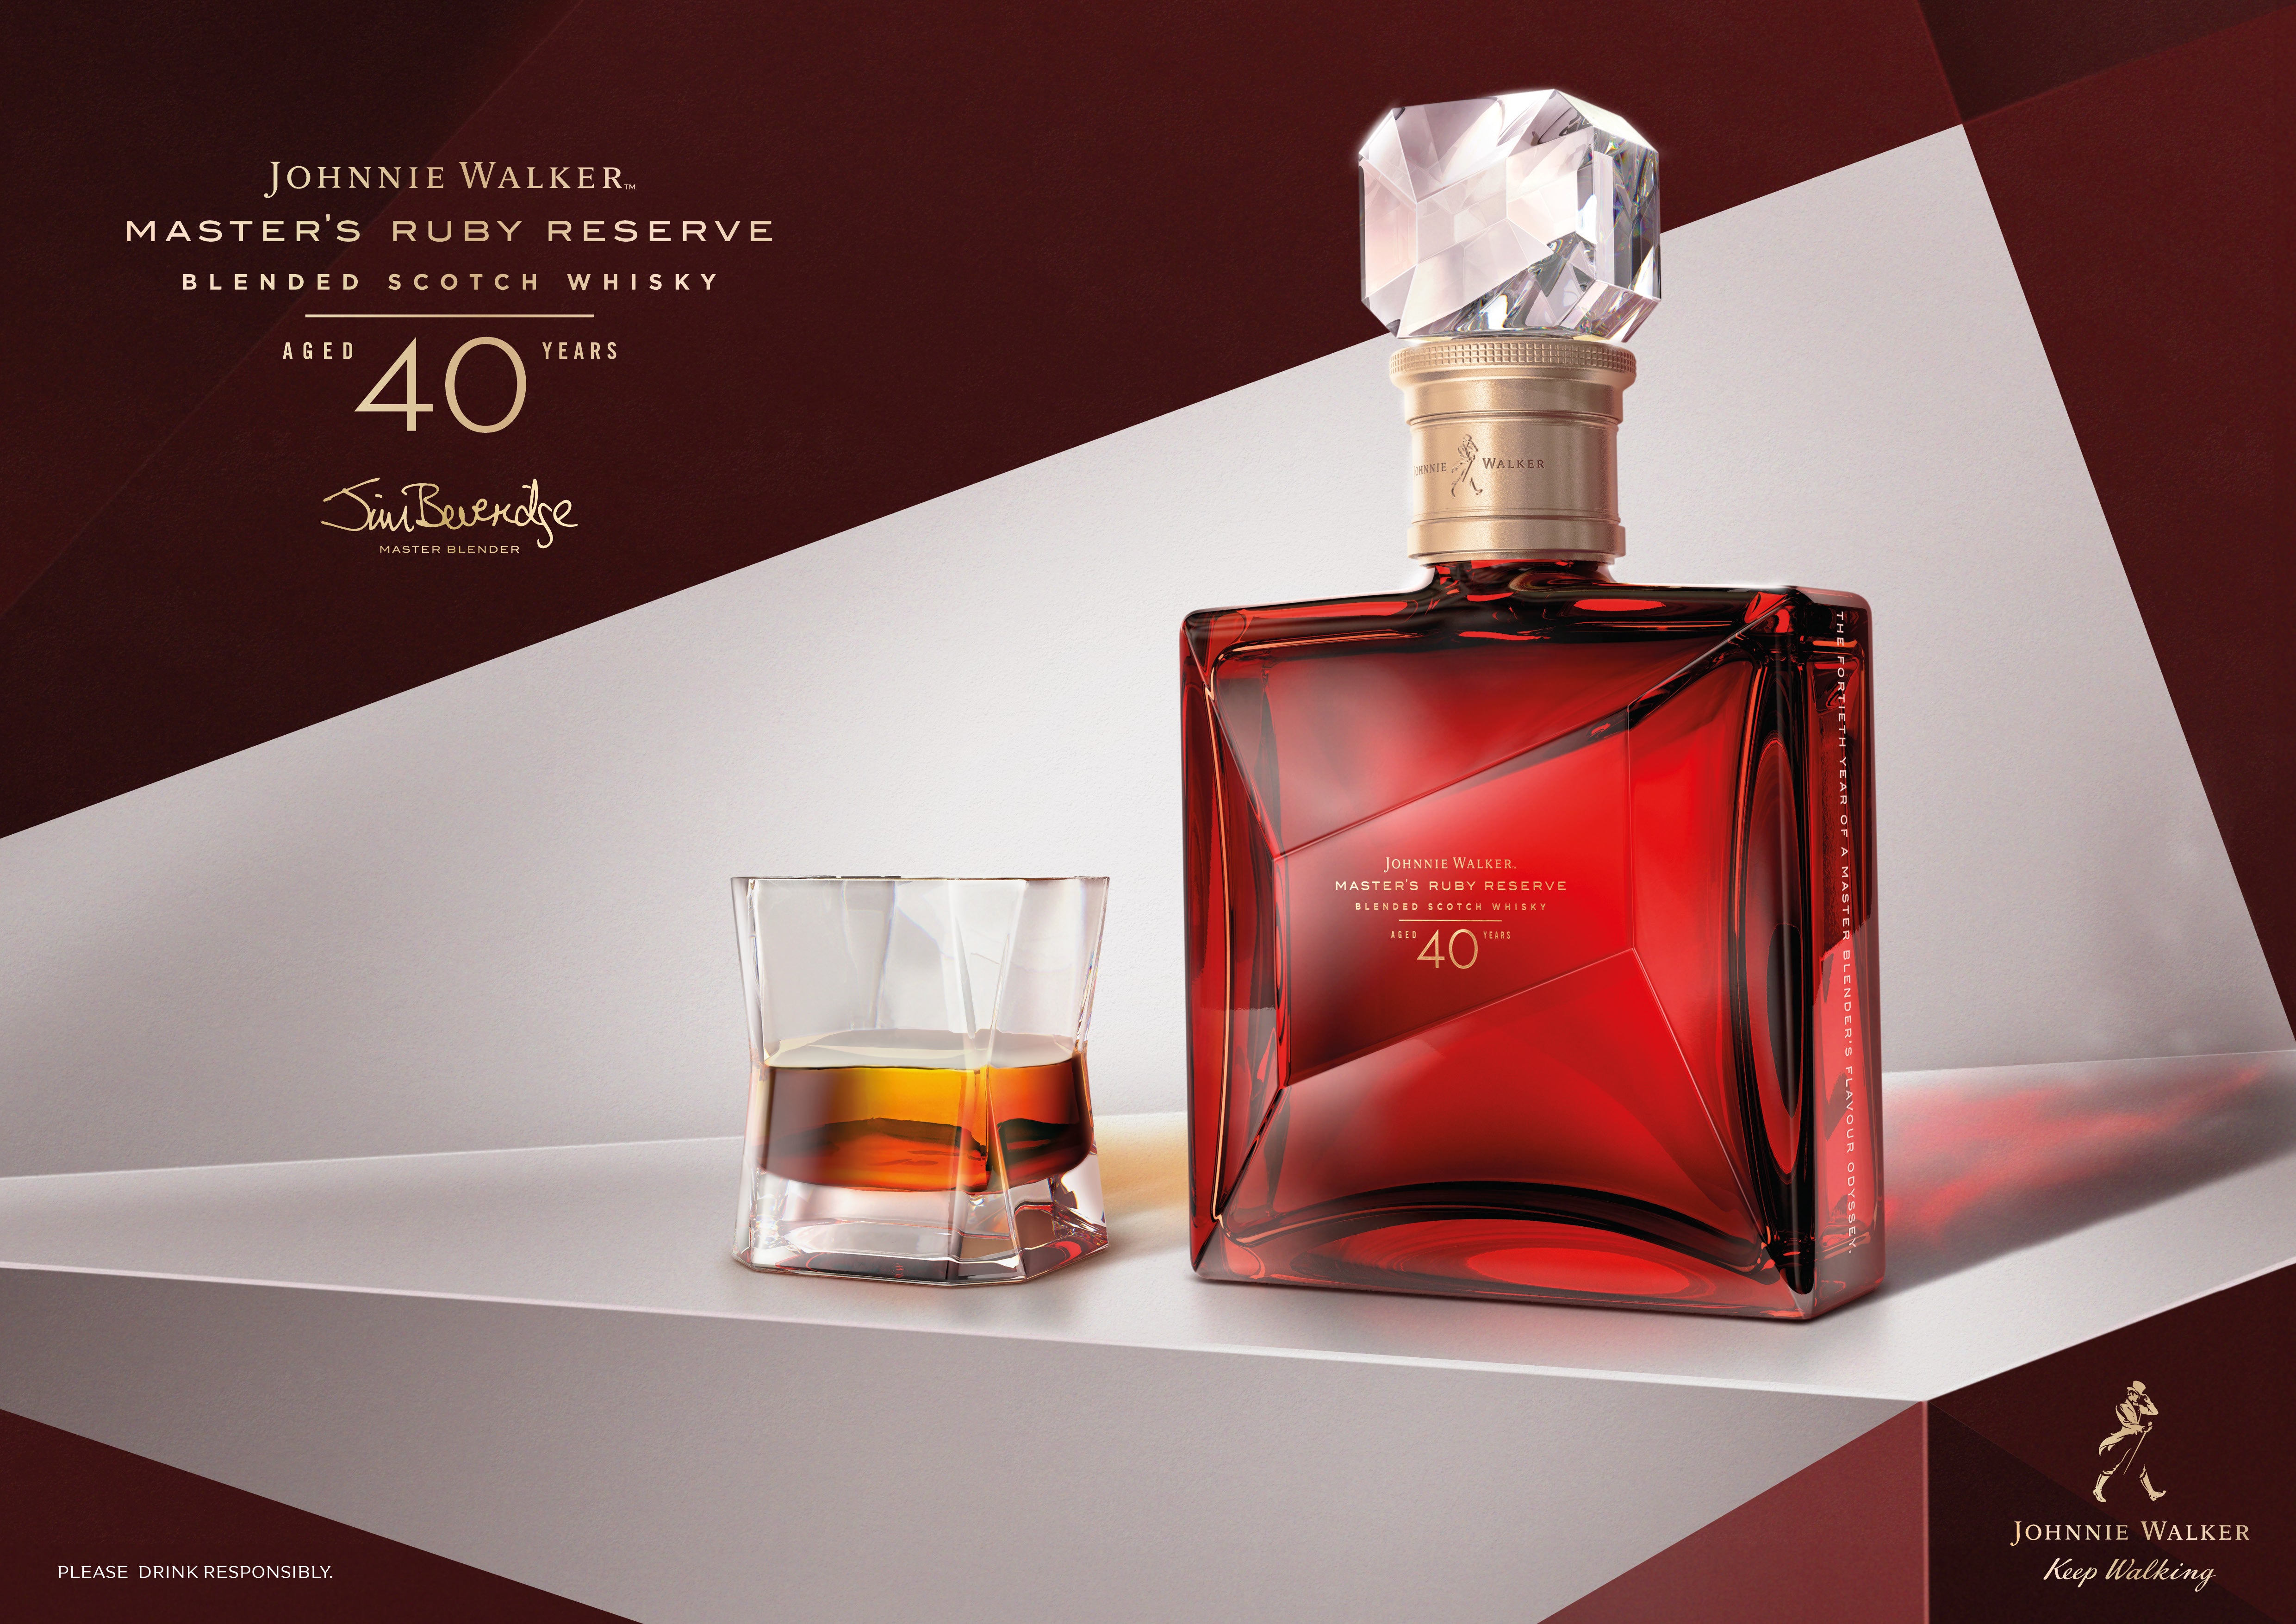 Johnnie Walker Master's Ruby Reserve 40 Year Old Blended Scotch Whisky, 70cl